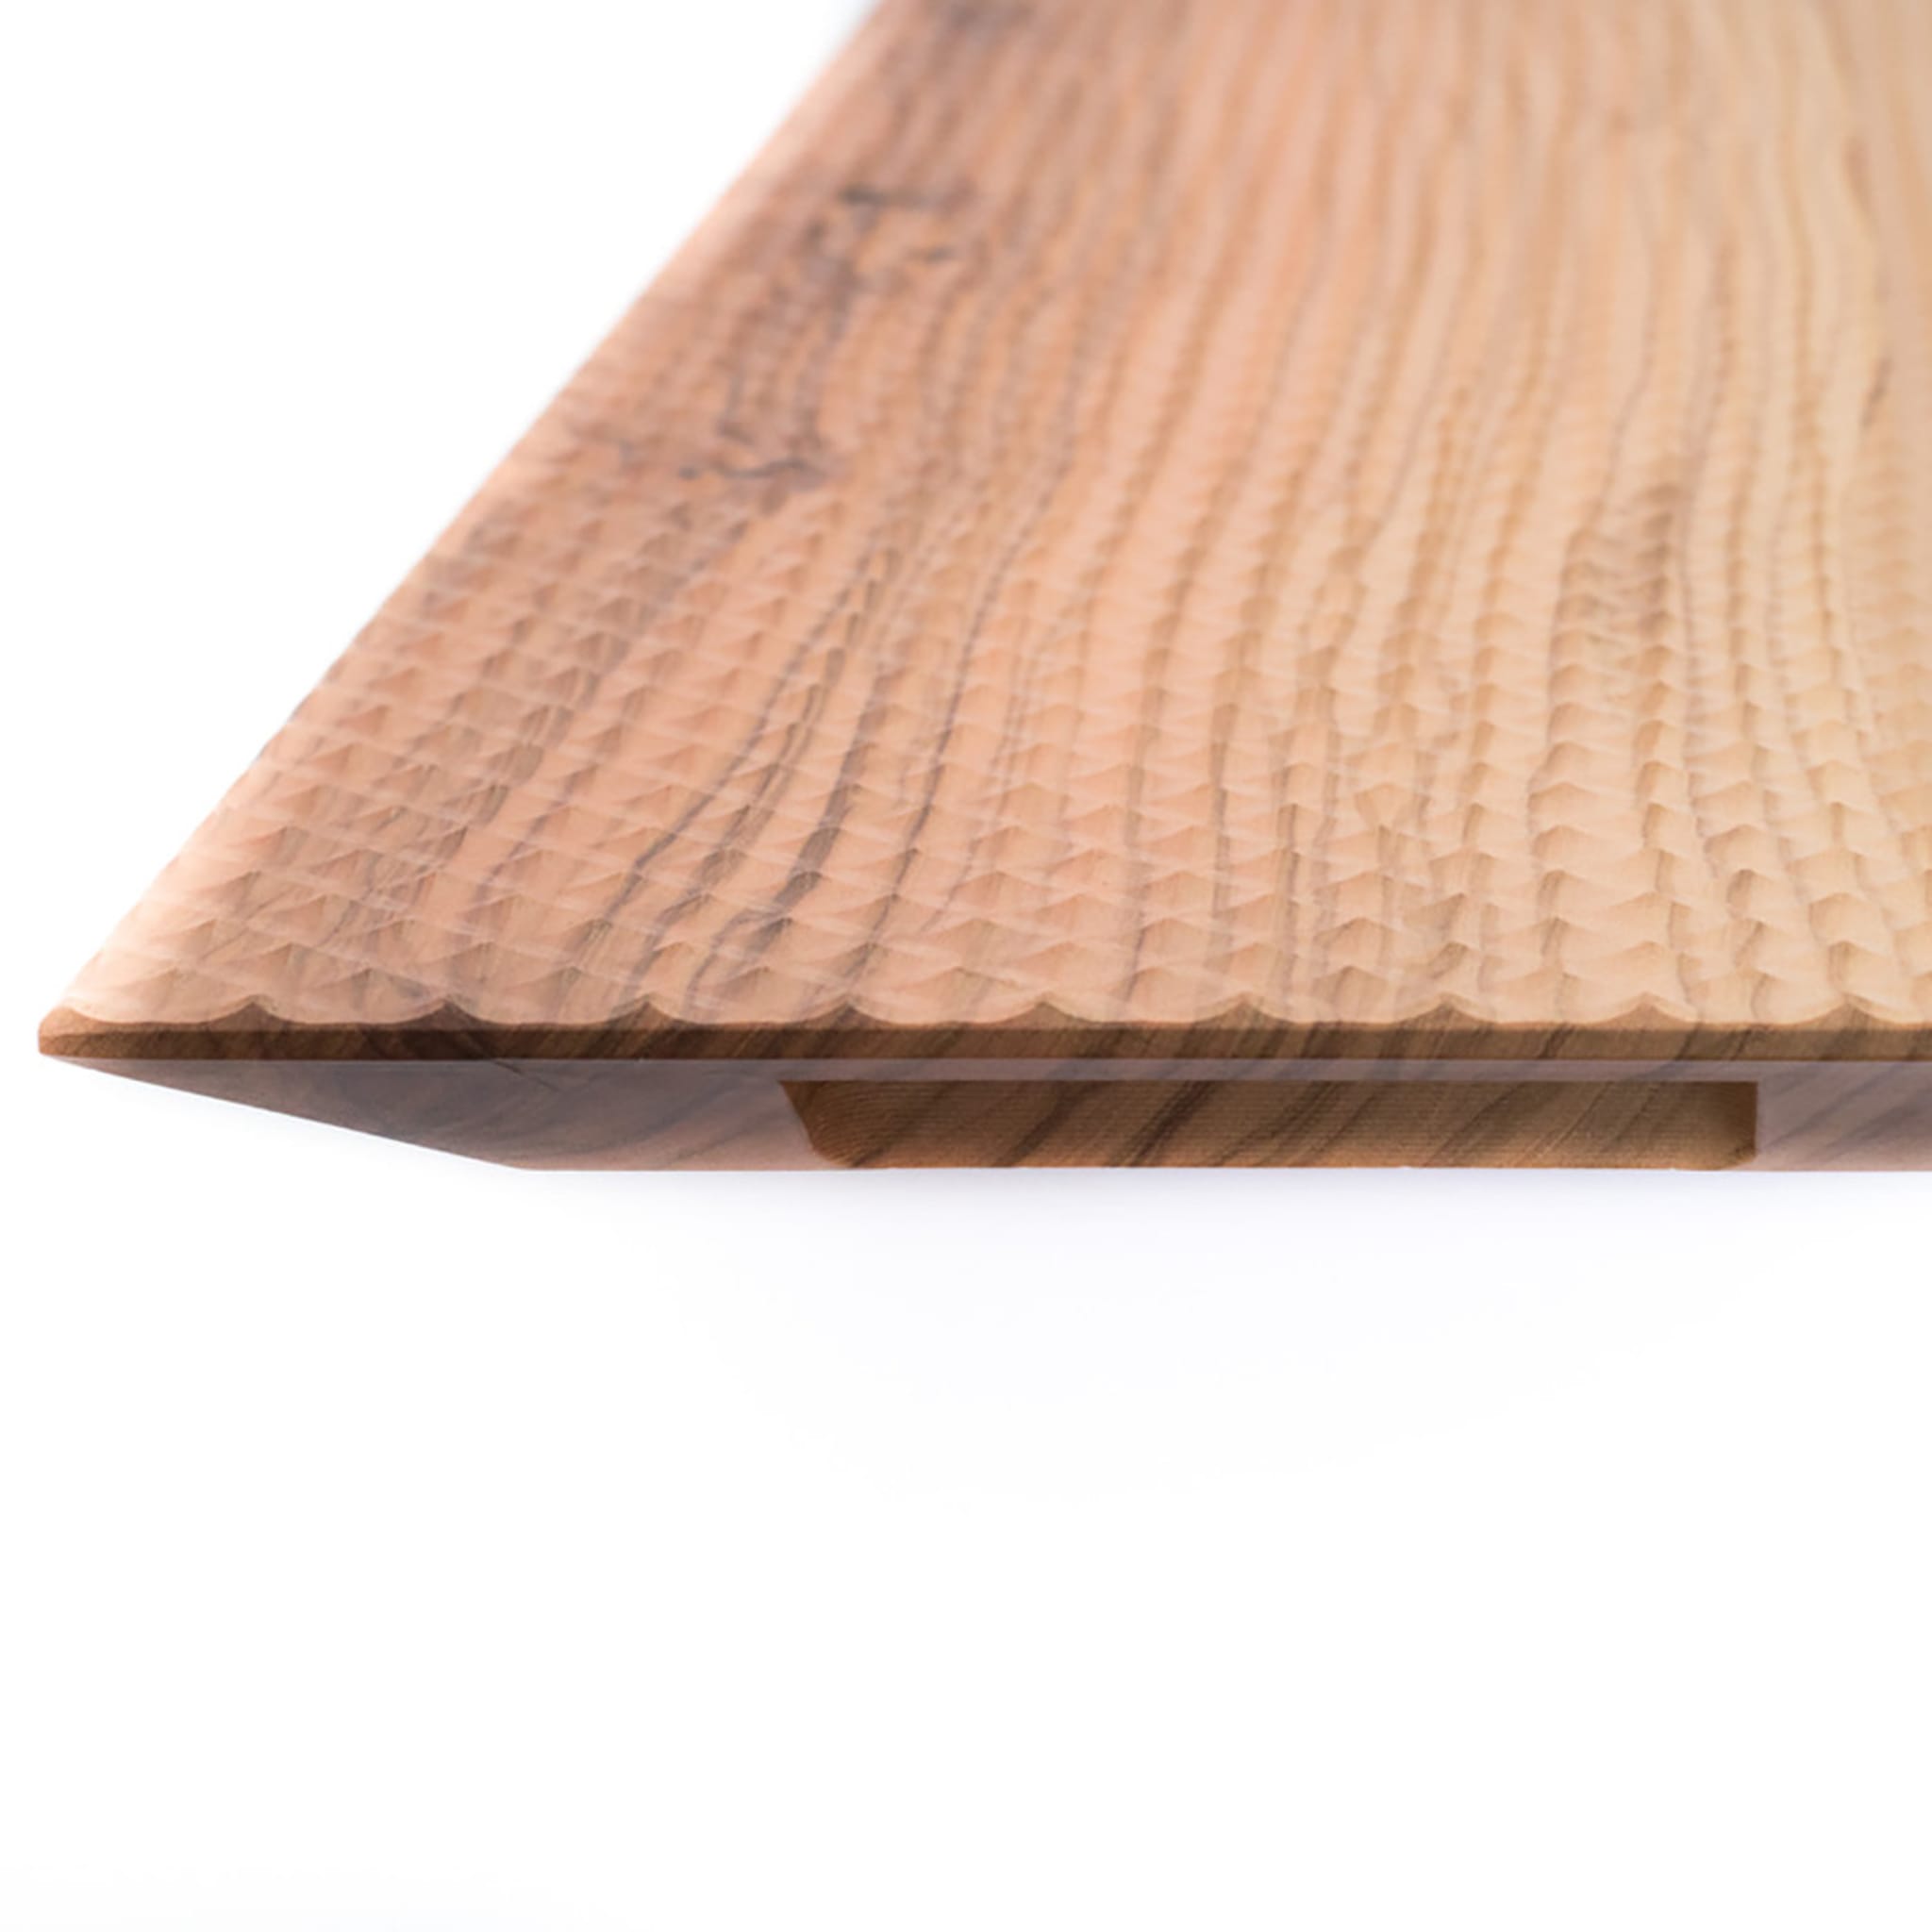 Inulivo Japan Wood Chopping Board - Alternative view 3